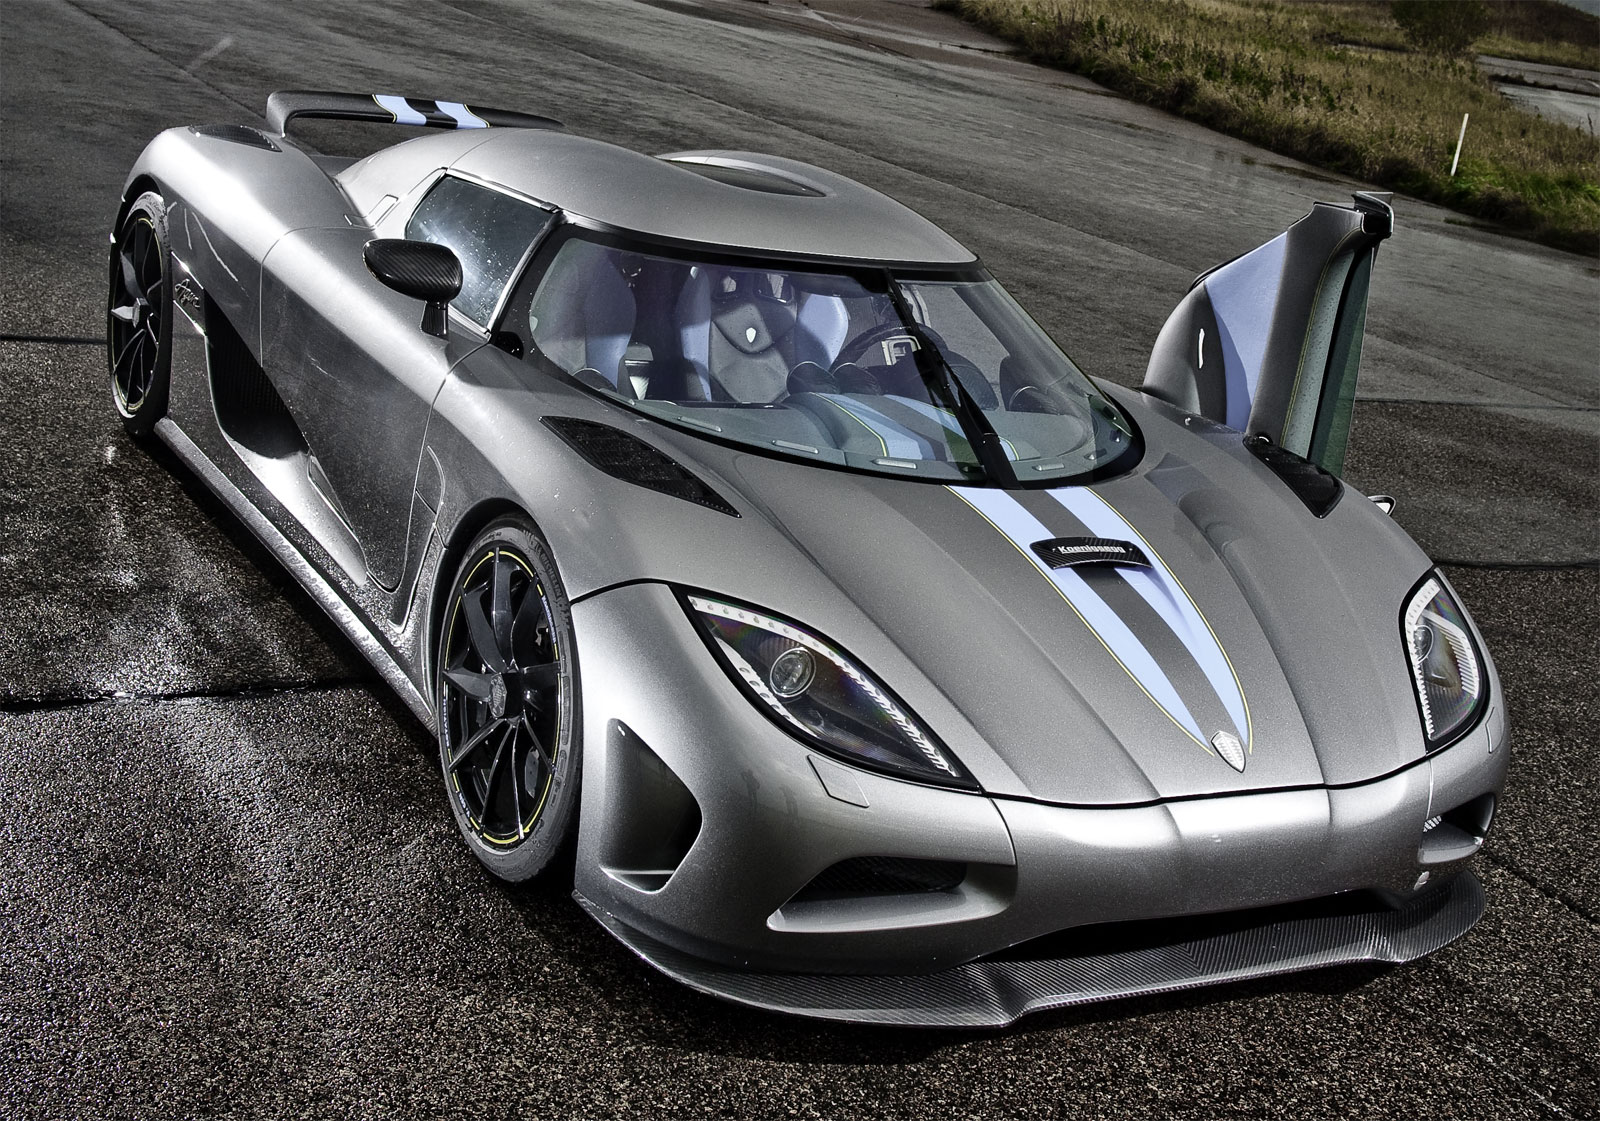 Amazing Koenigsegg Agera Pictures & Backgrounds